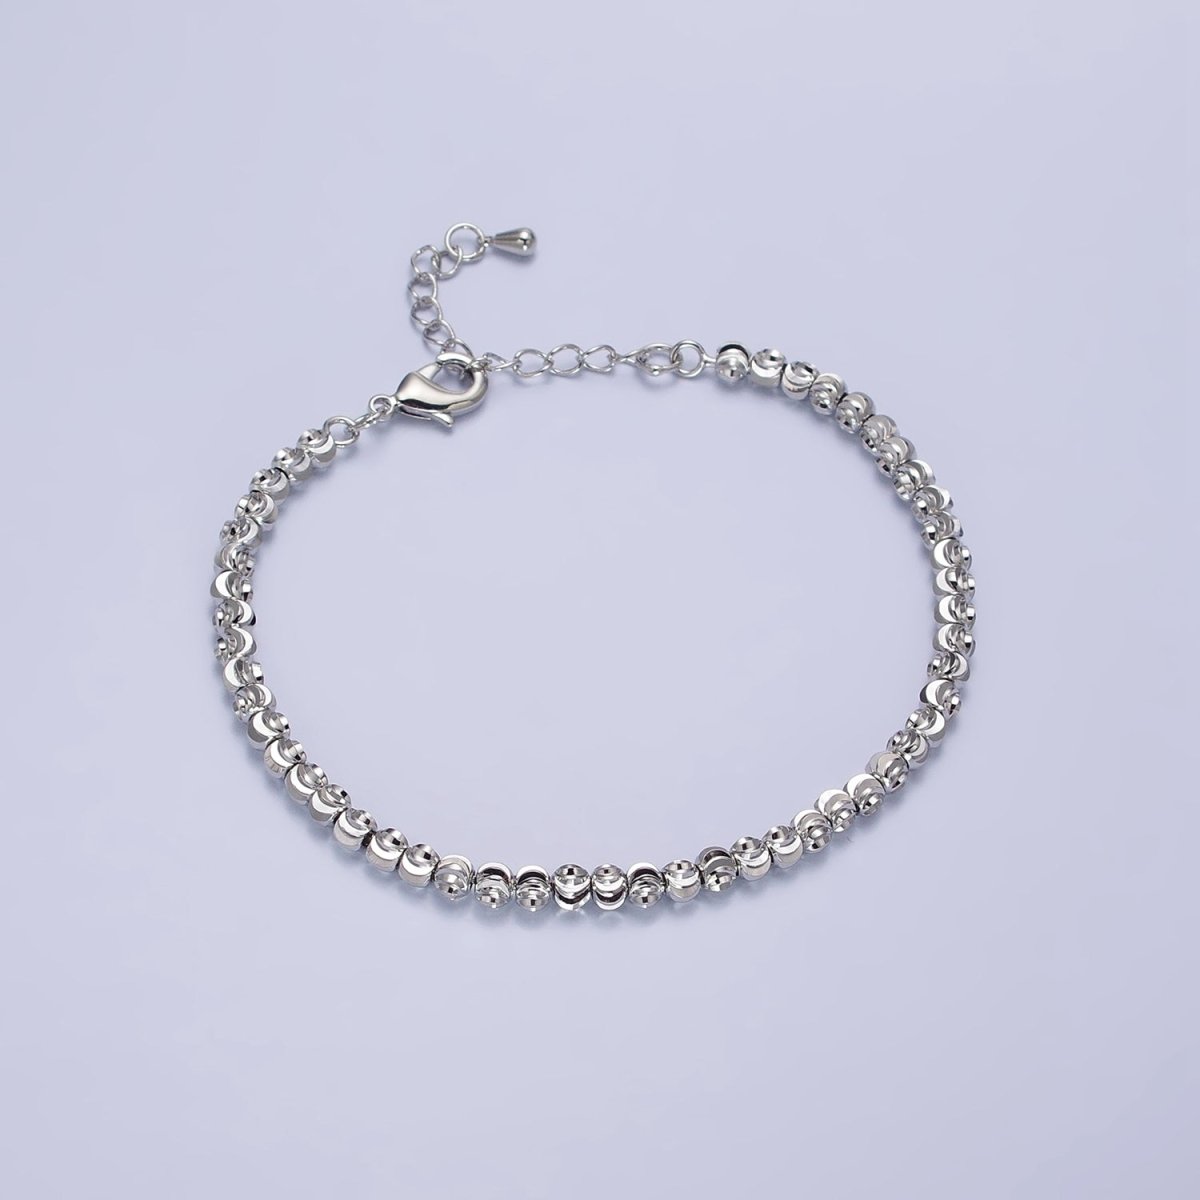 3.5mm, 2.5mm Sparkling Moon Cut Ball Beaded Ball Bracelet 7 Inch Chain Bracelet in Gold & Silver | WA-1576 - WA-1579 Clearance Pricing - DLUXCA